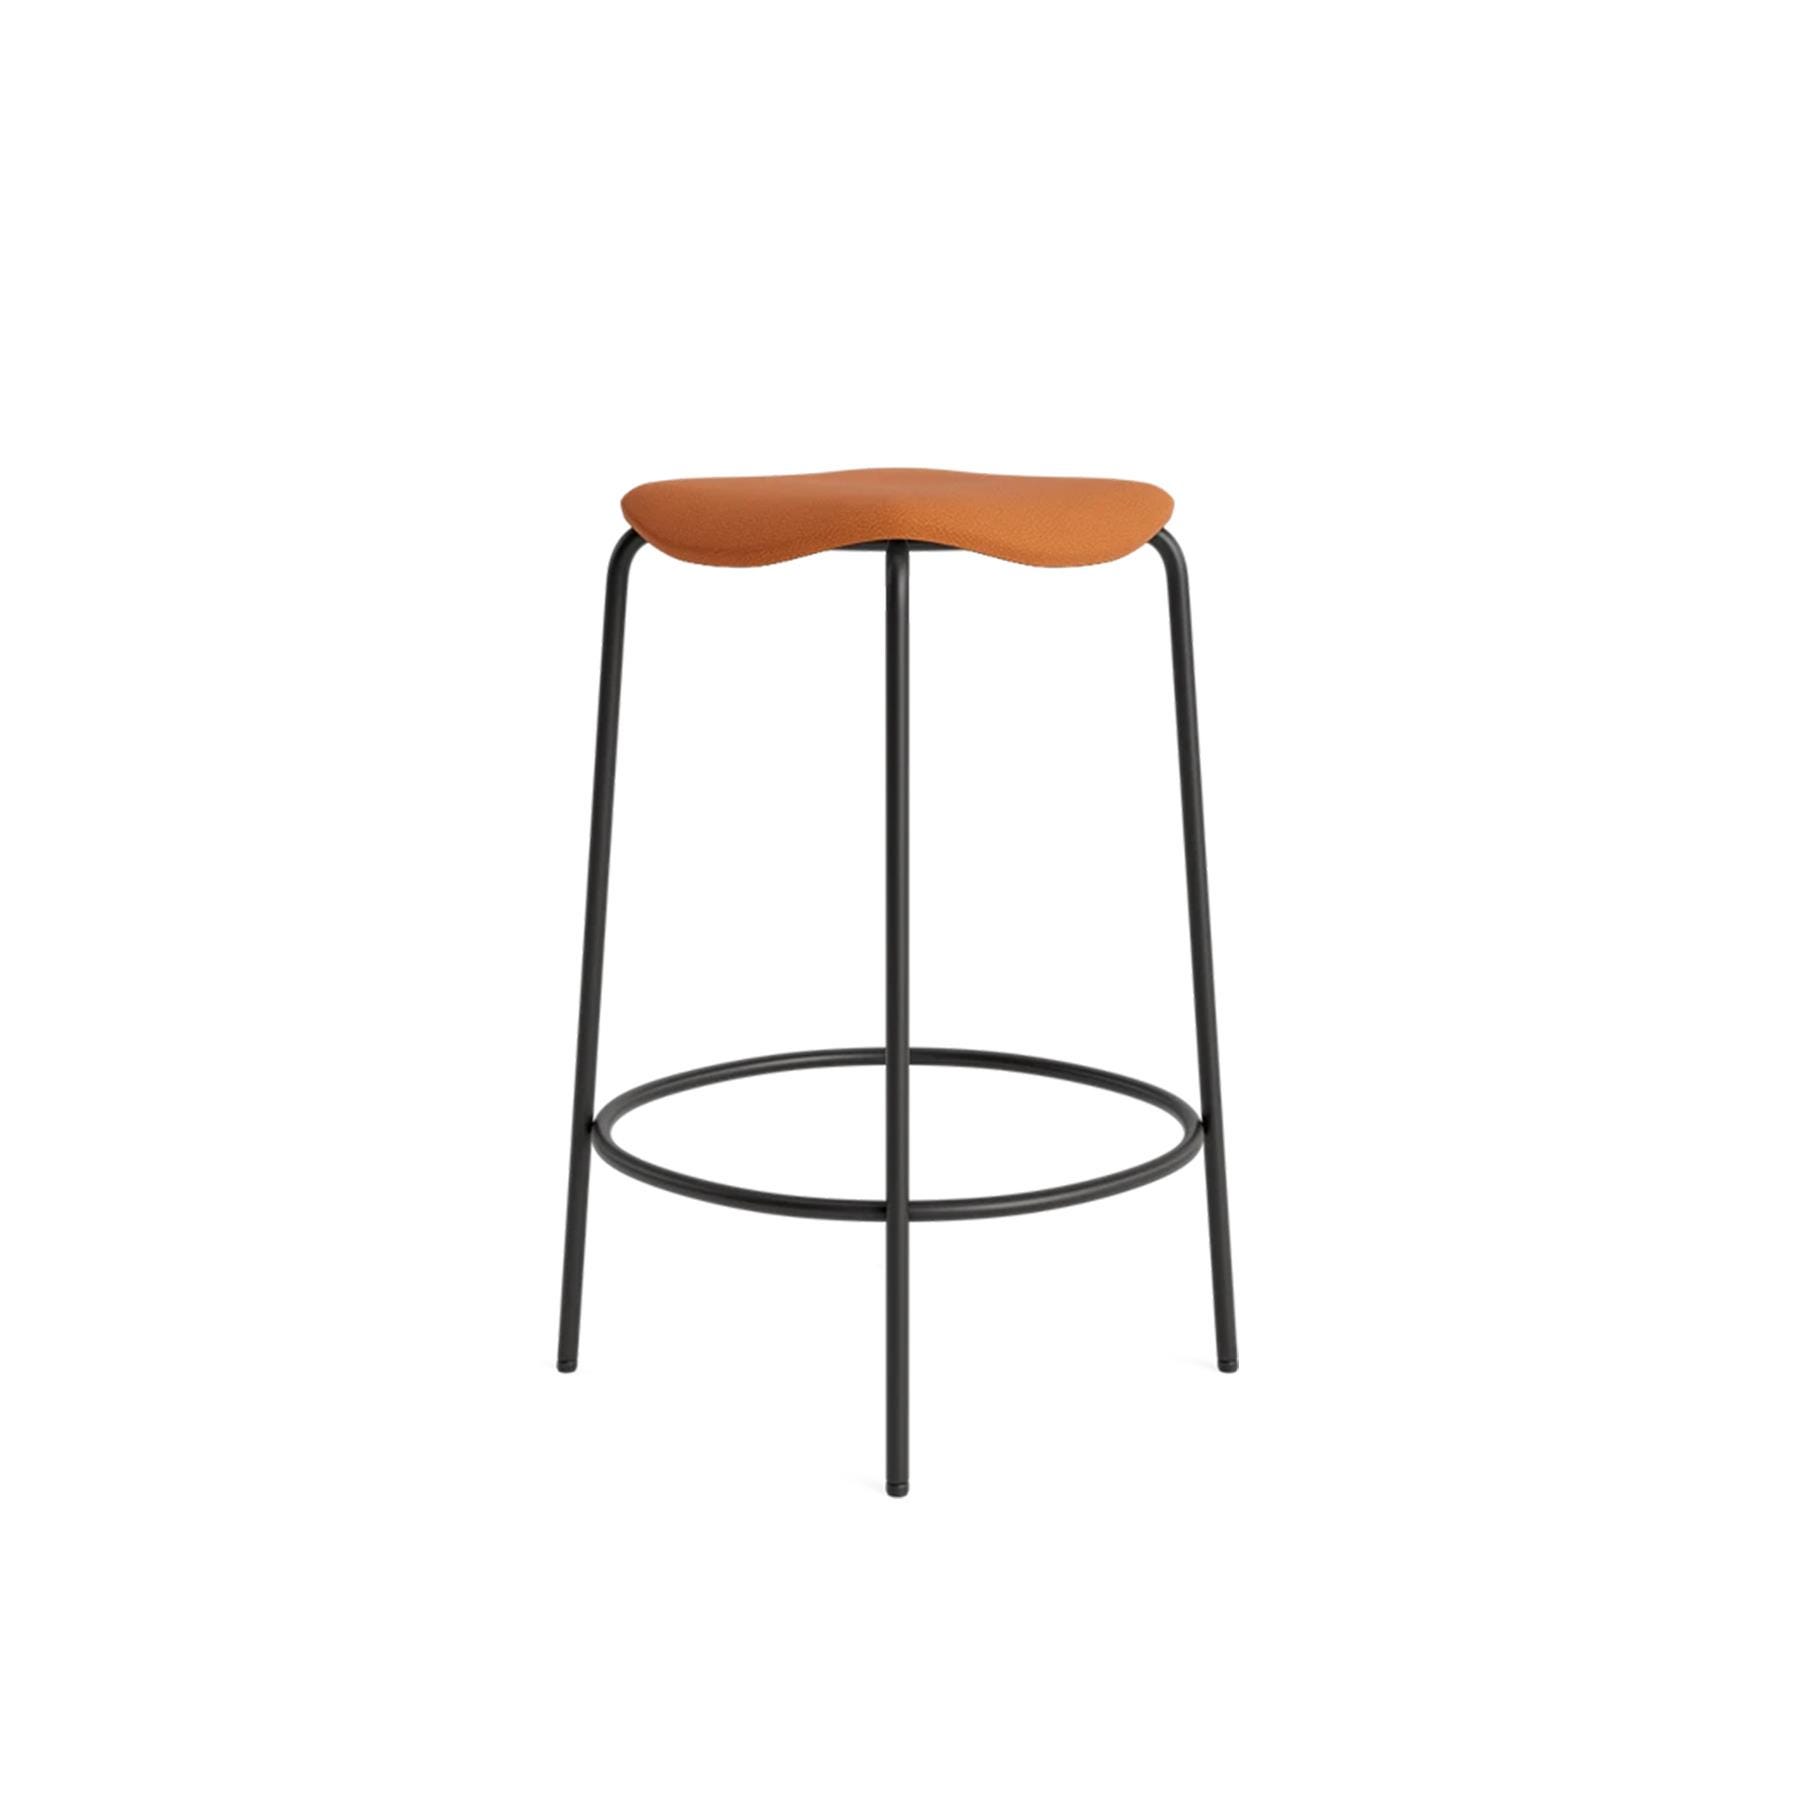 Make Nordic Ugo Stool Kitchen Counter Stool Spoor Leather Cognac Brown Designer Furniture From Holloways Of Ludlow